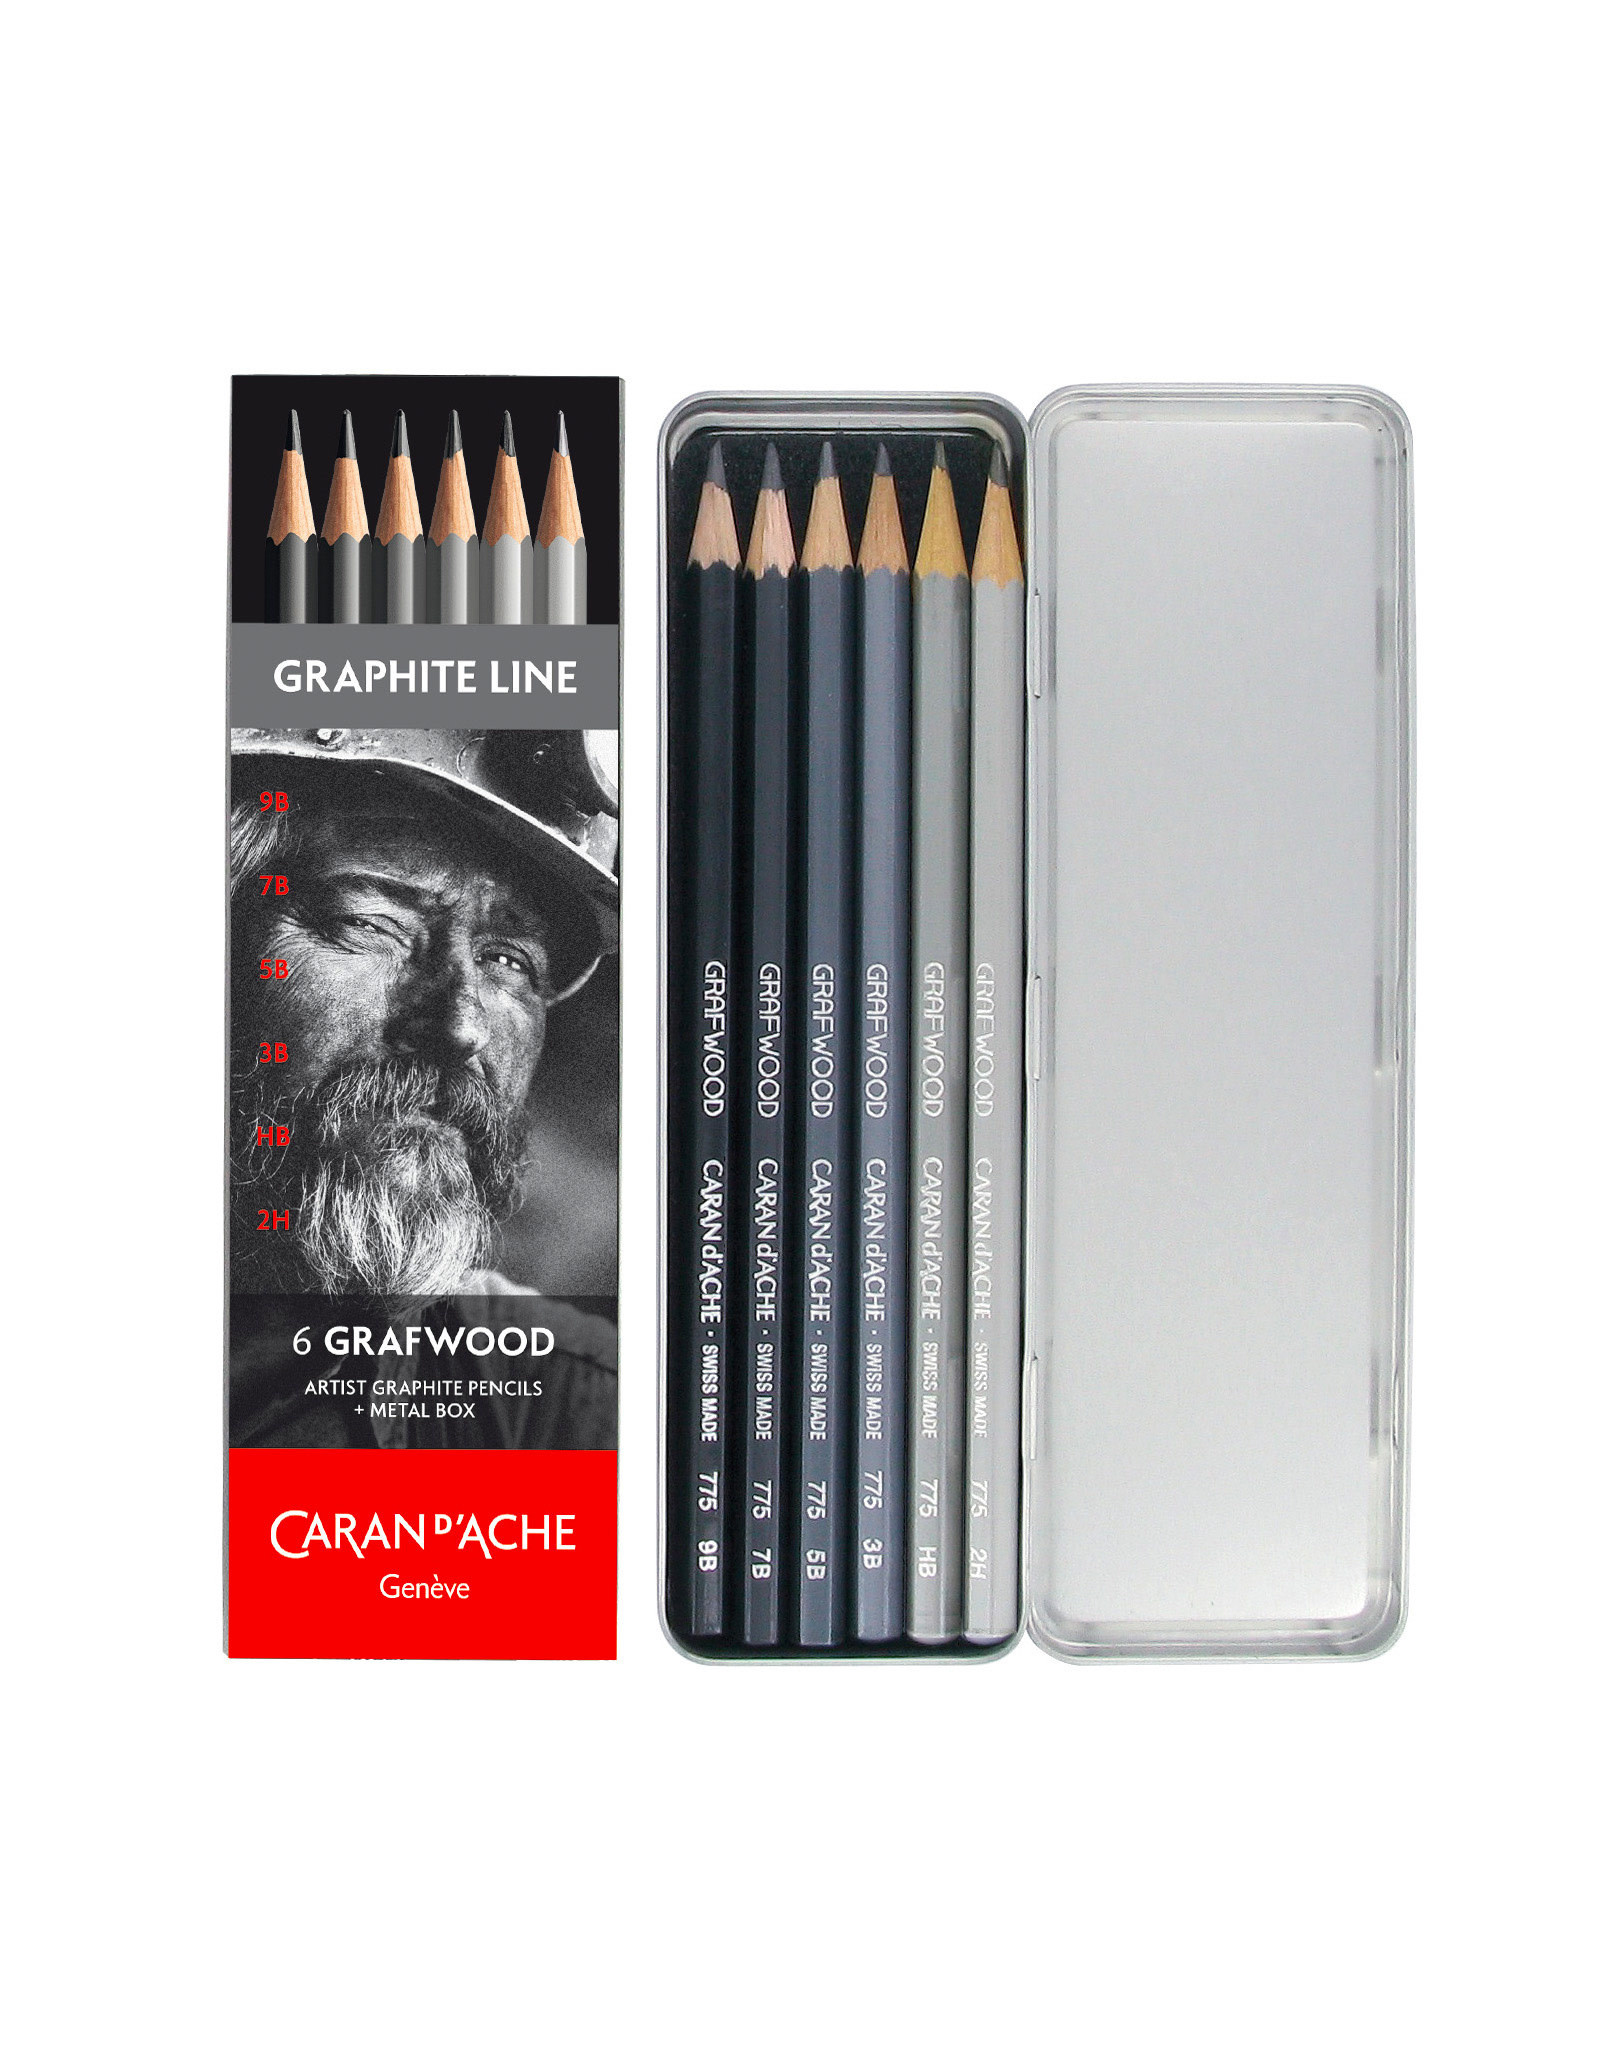 Conte Pencil Sets Drawing Set of 6